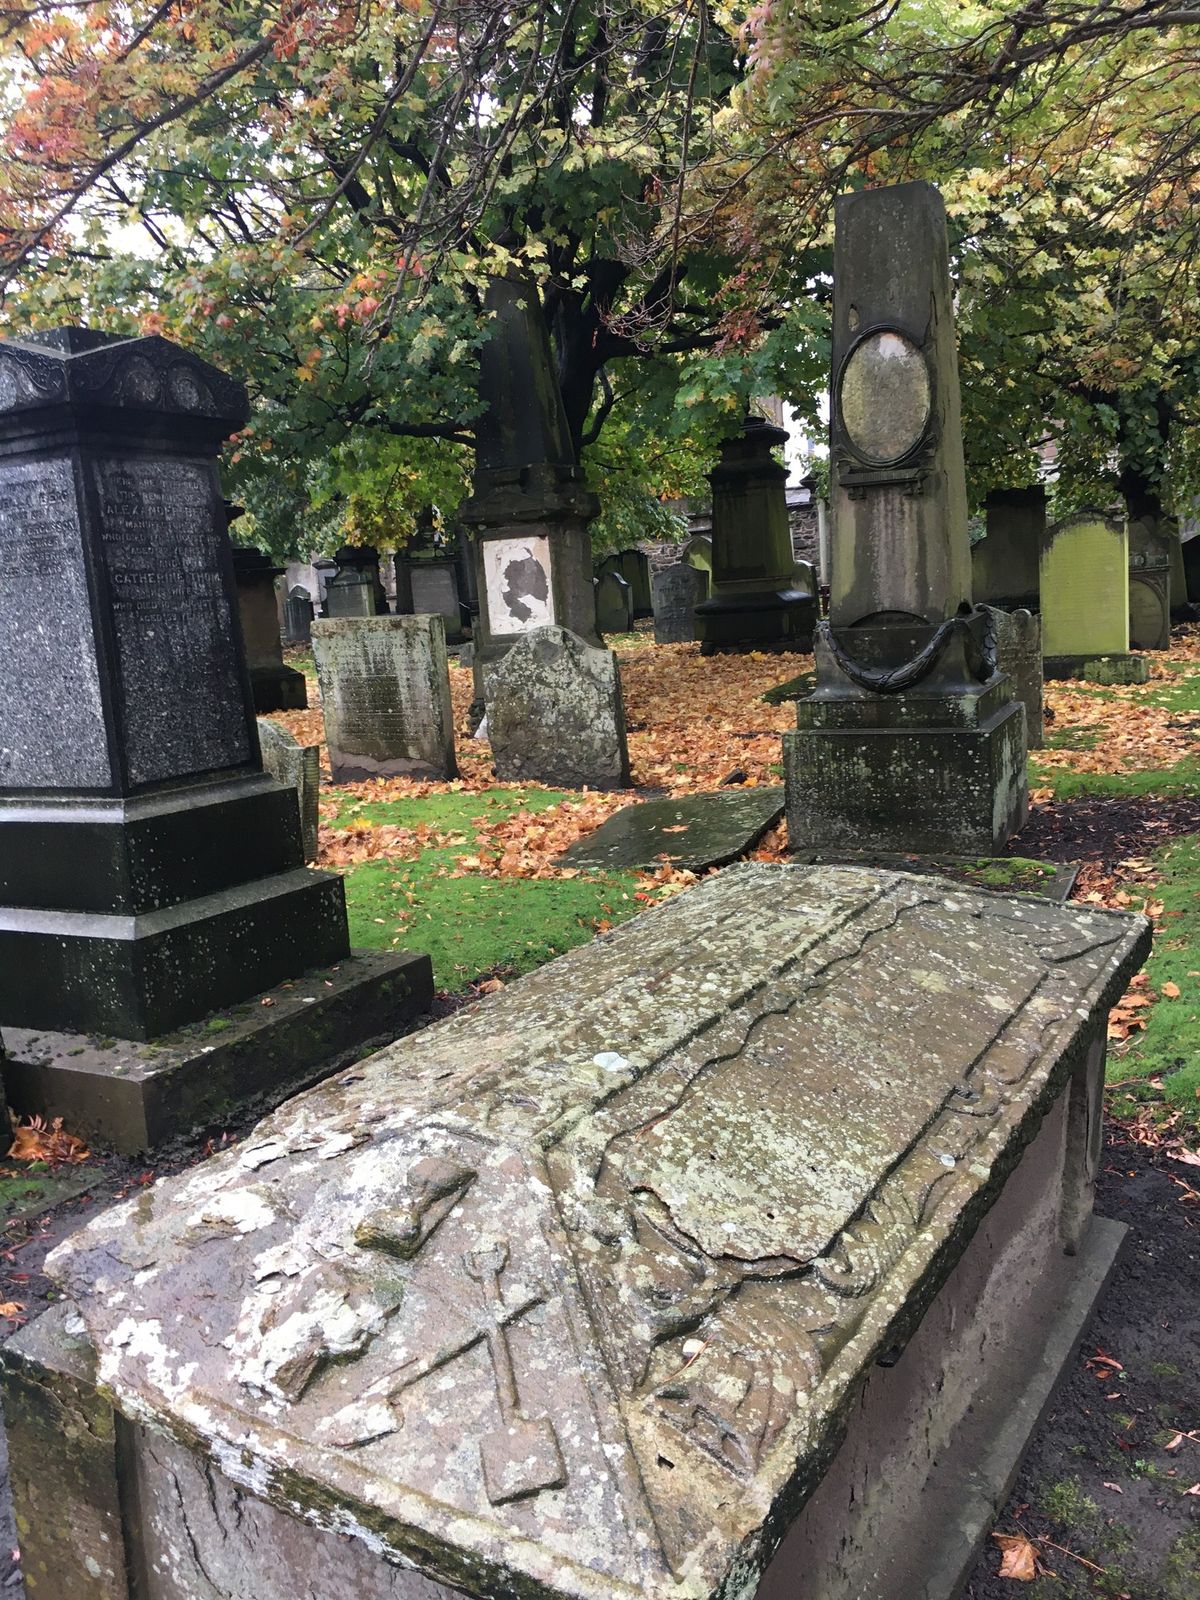 Guided tour of ancient Dundee Howff Cemetery. Meet in Meadowside entry.